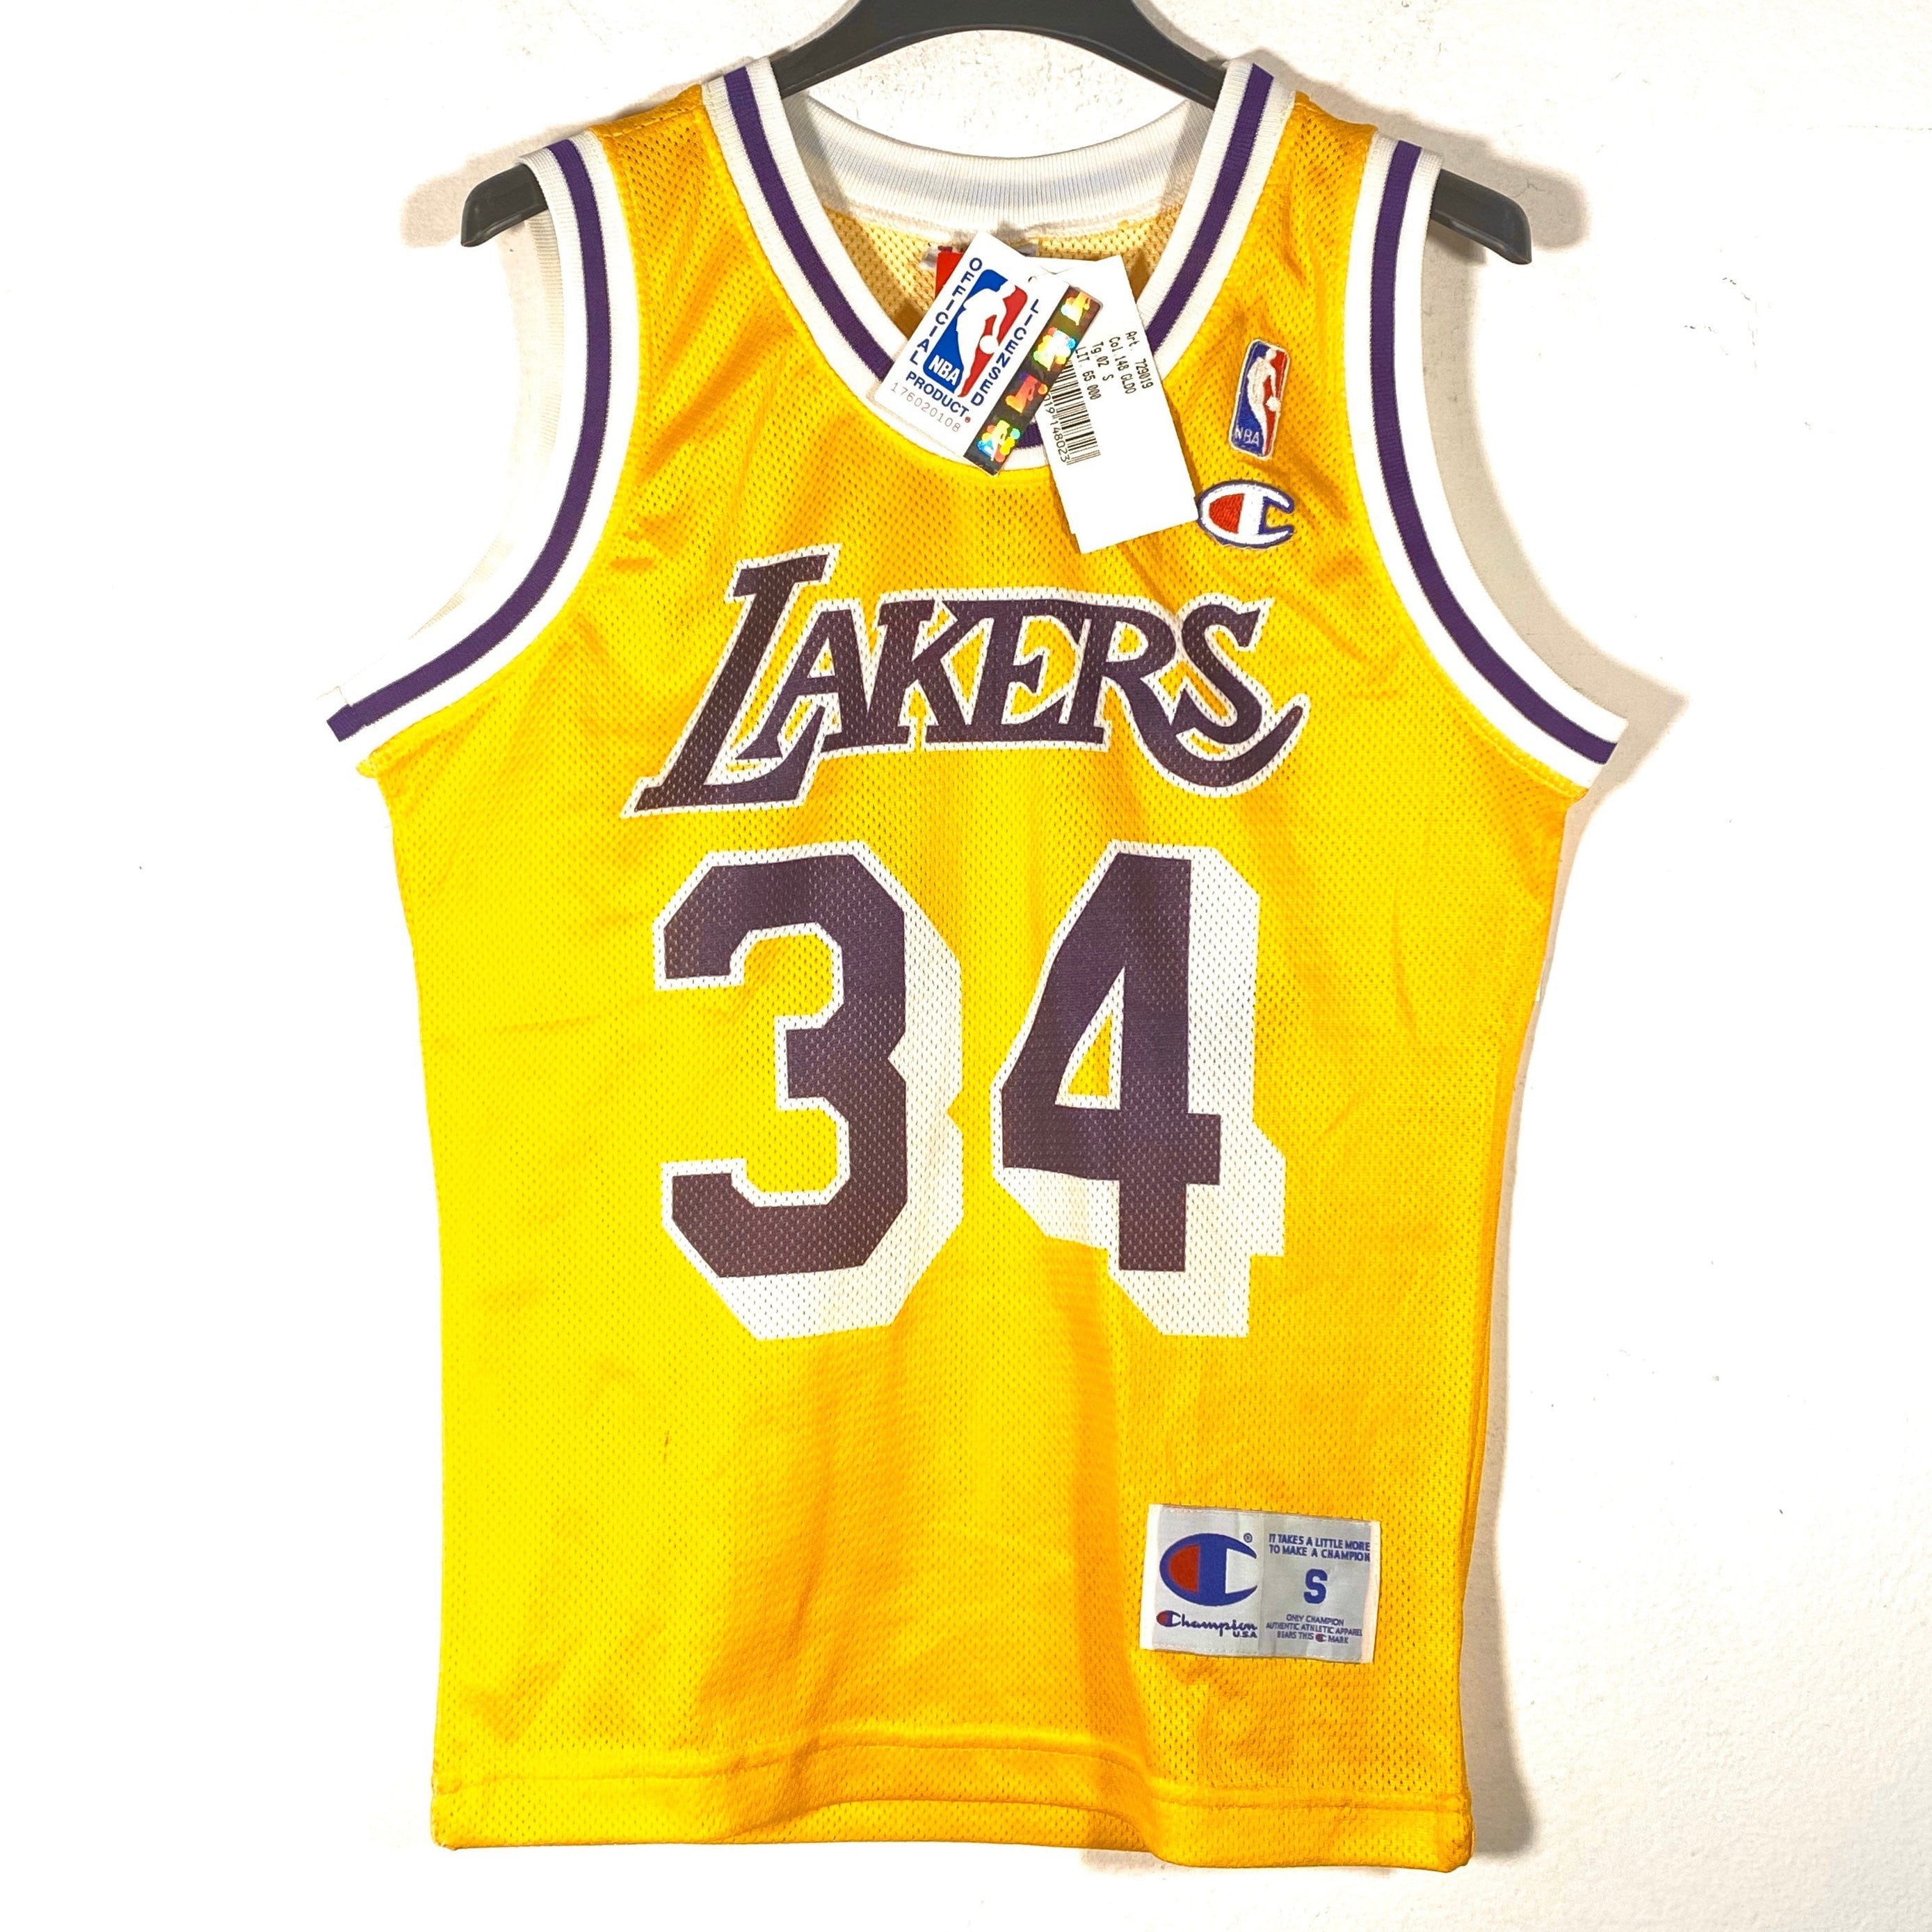 Shaquille O'Neal SHAQ Autographed Yellow and Purple #33 Jersey Beckett  Authentic